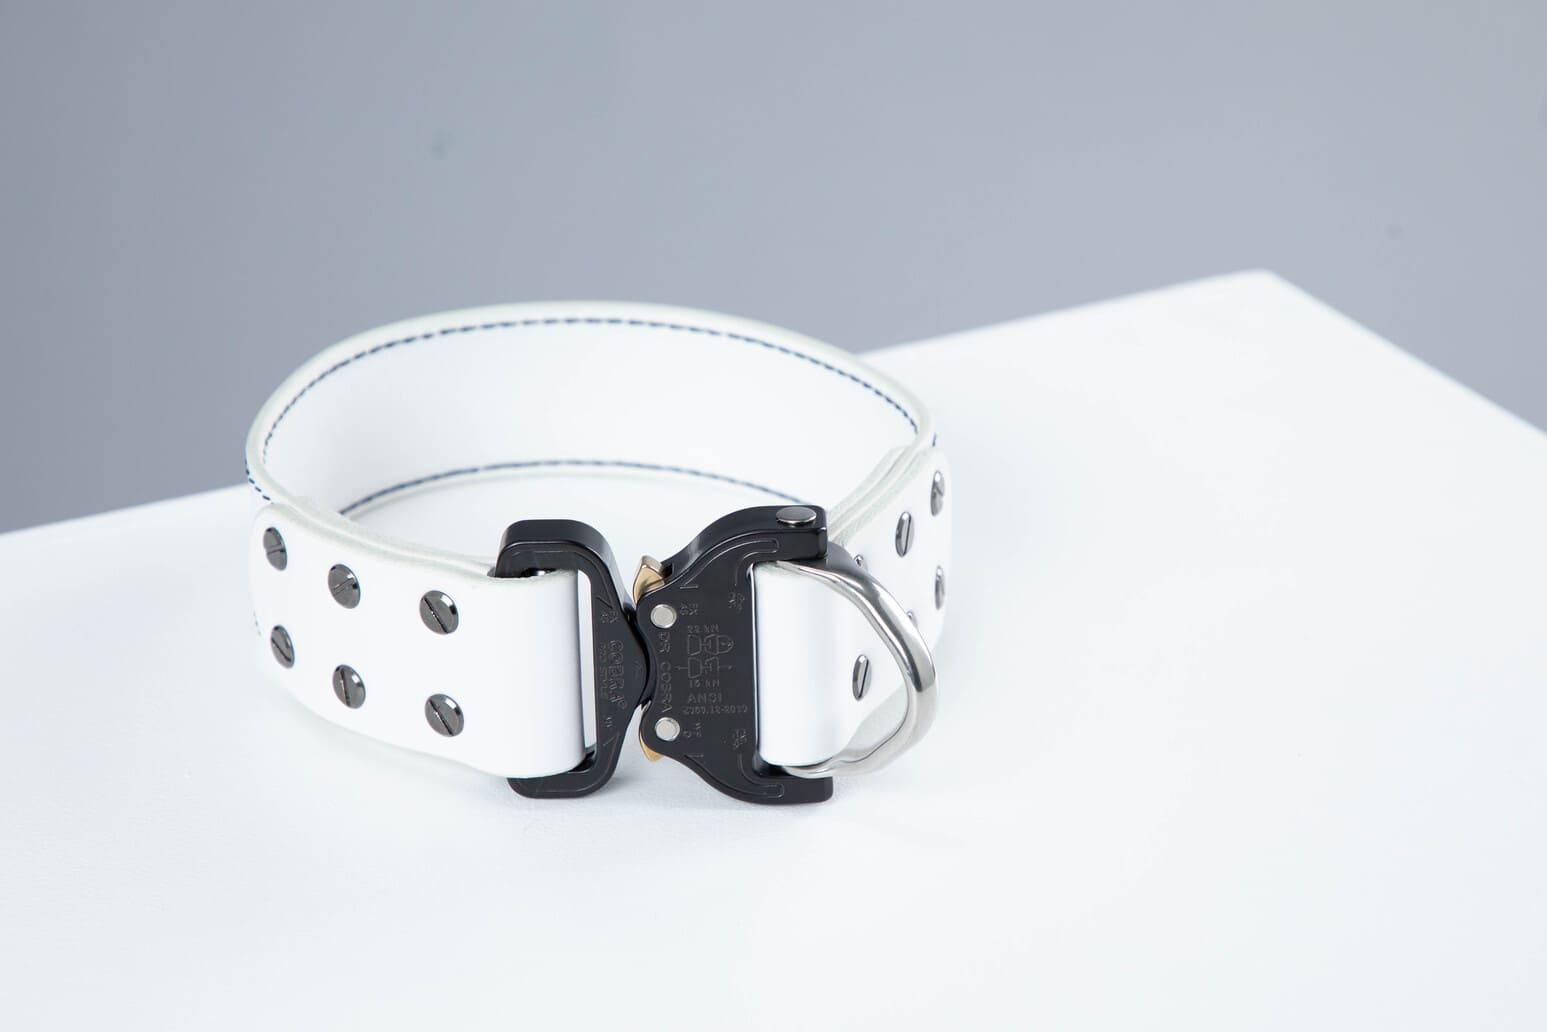 White leather dog collar with COBRA® buckle - European handmade dog accessories by My Wild Other